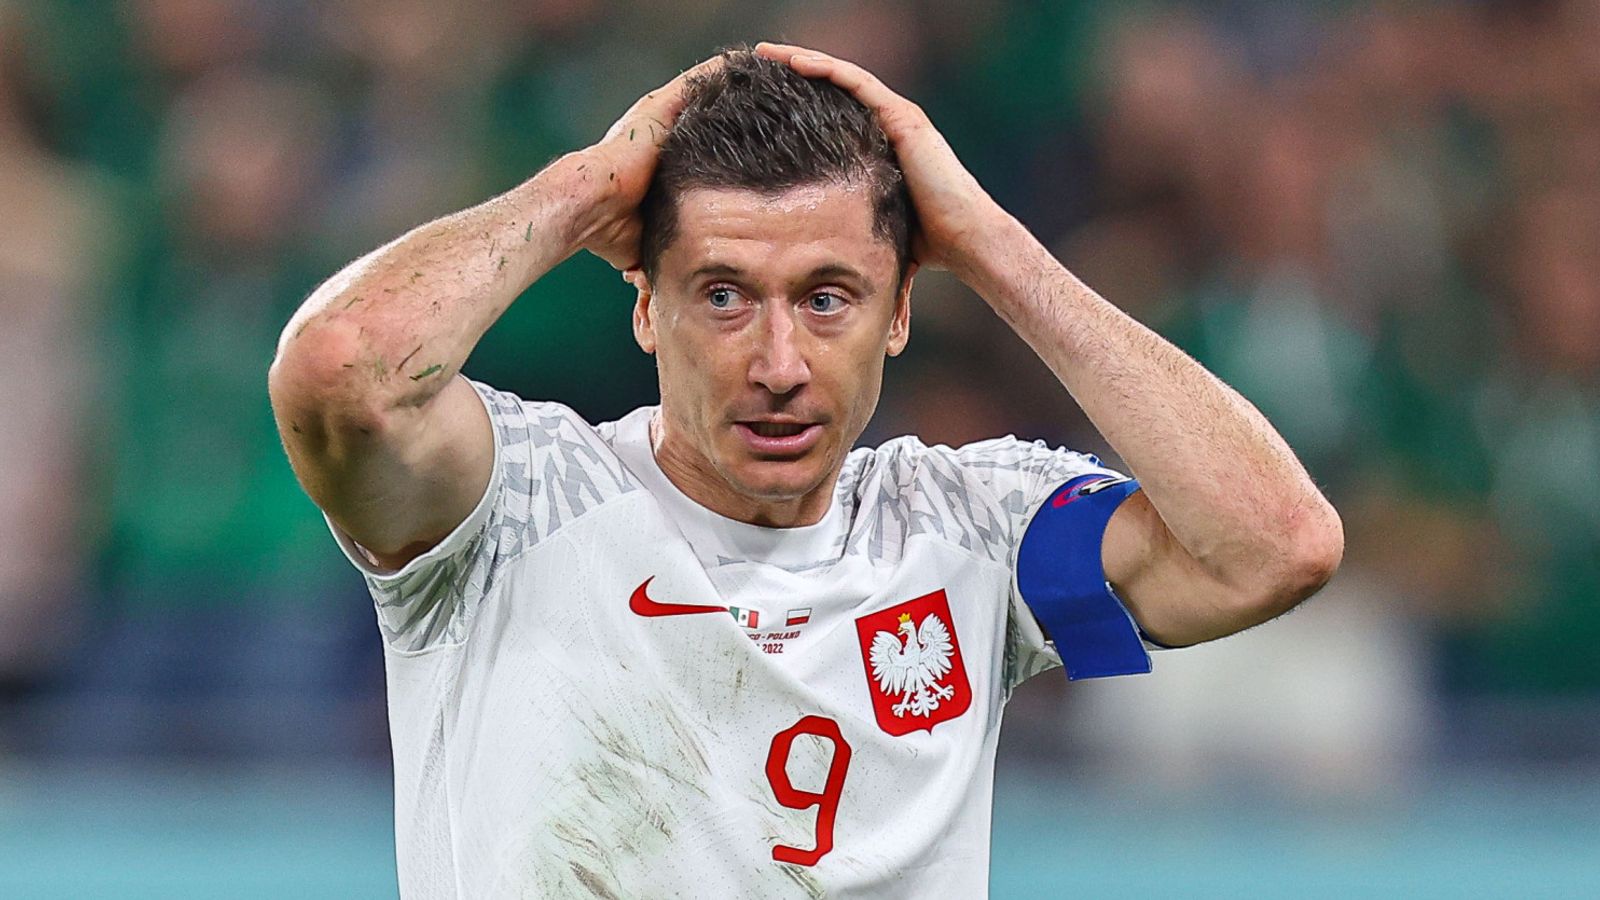 Mexico 0-0 Poland: Robert Lewandowski has penalty saved in World Cup Group C stalemate